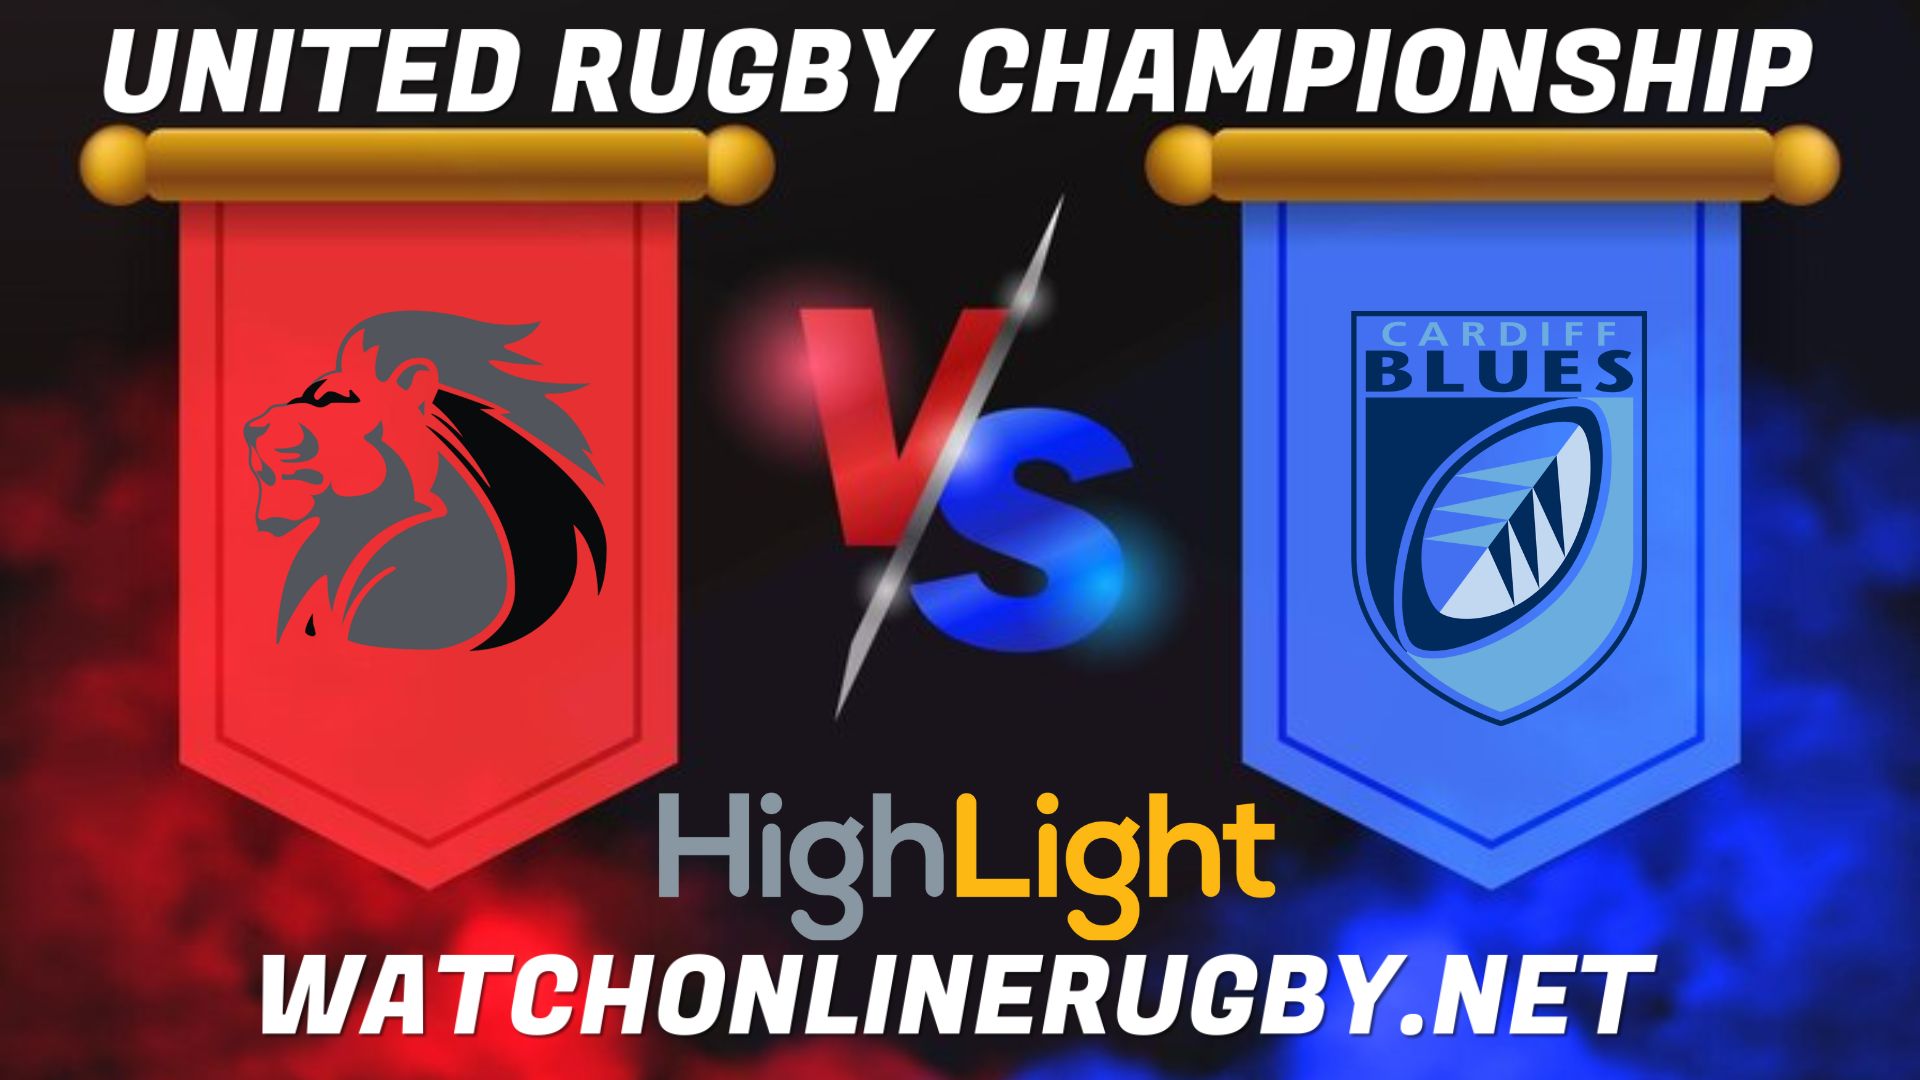 Lions Vs Cardiff Blues United Rugby Championship 2022 RD 6